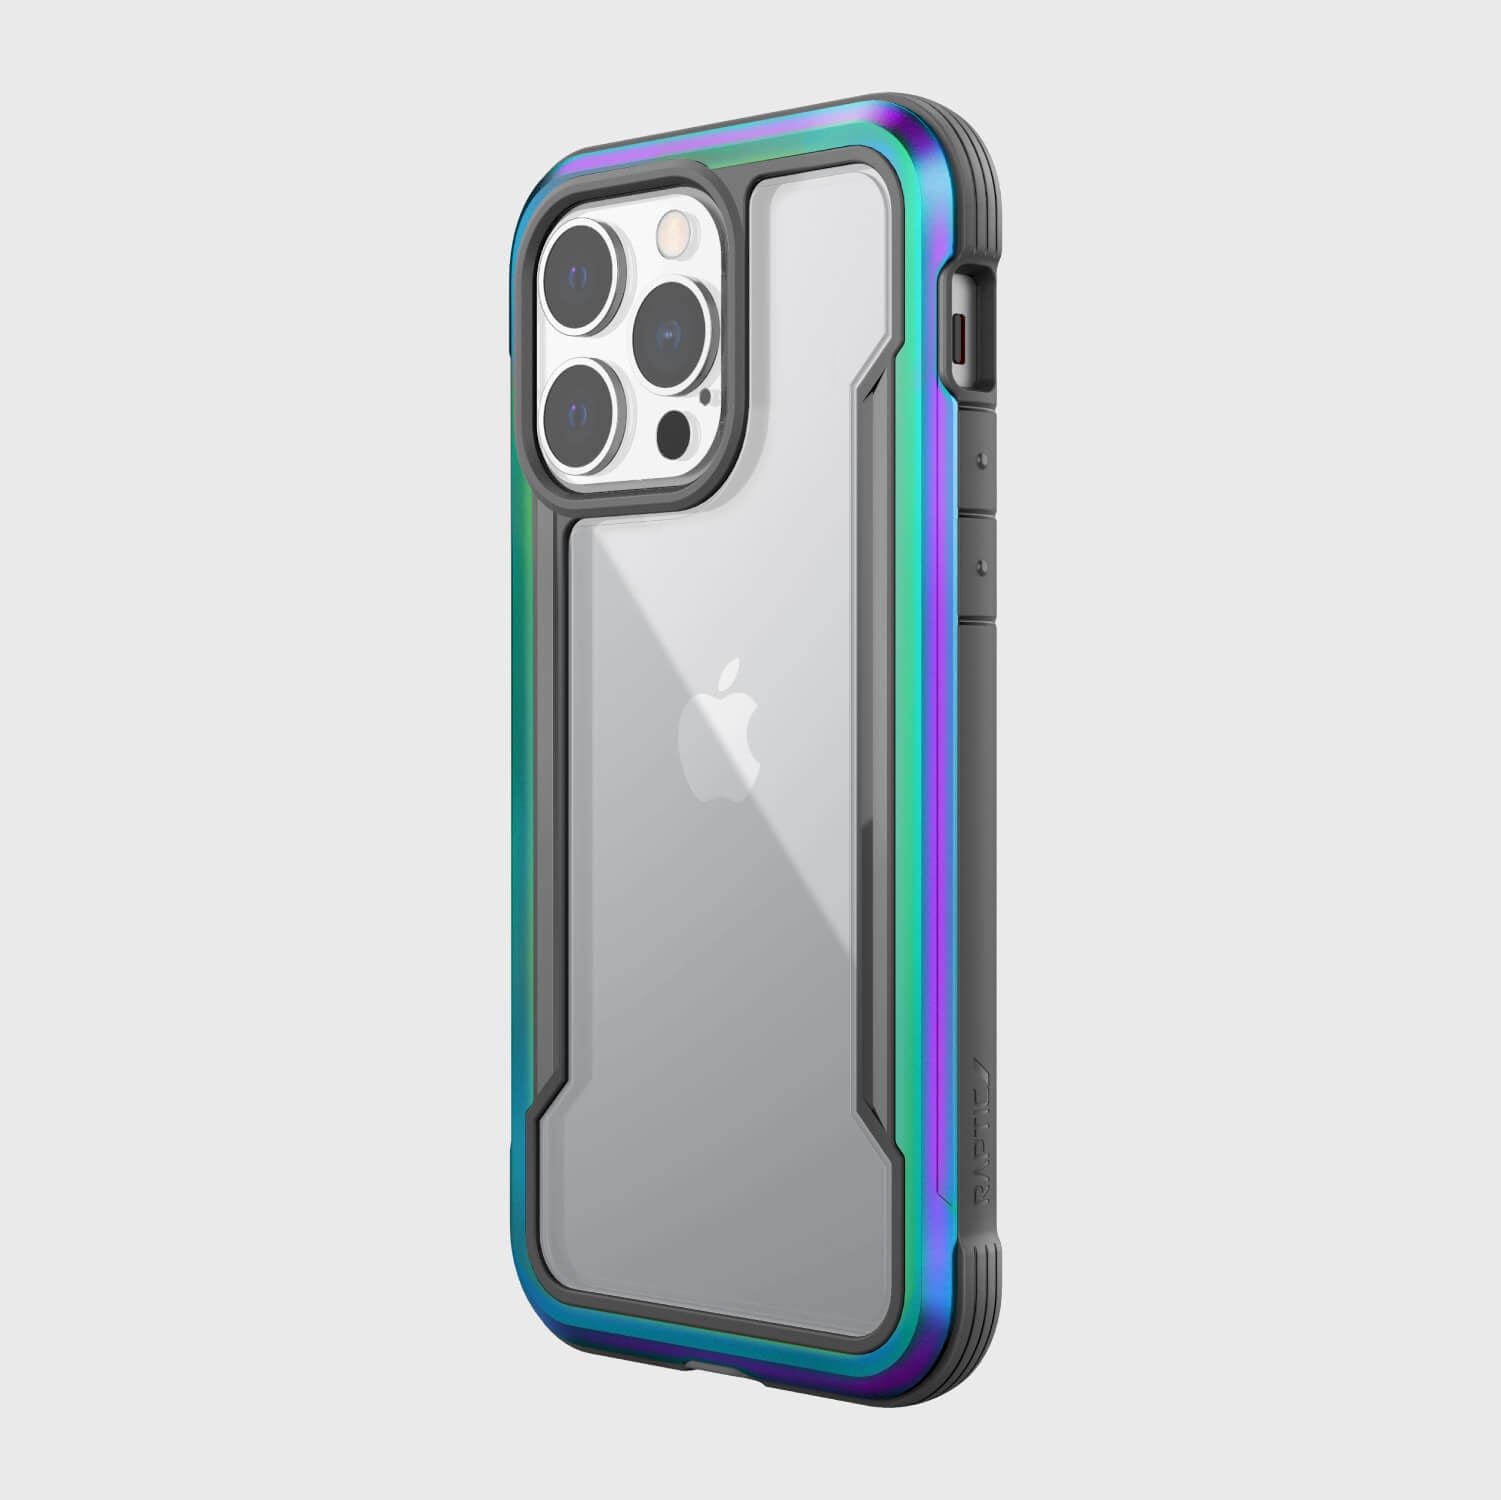 The back view of the Raptic Shield Pro case for iPhone 13 Pro Case - SHIELD PRO, providing drop protection.